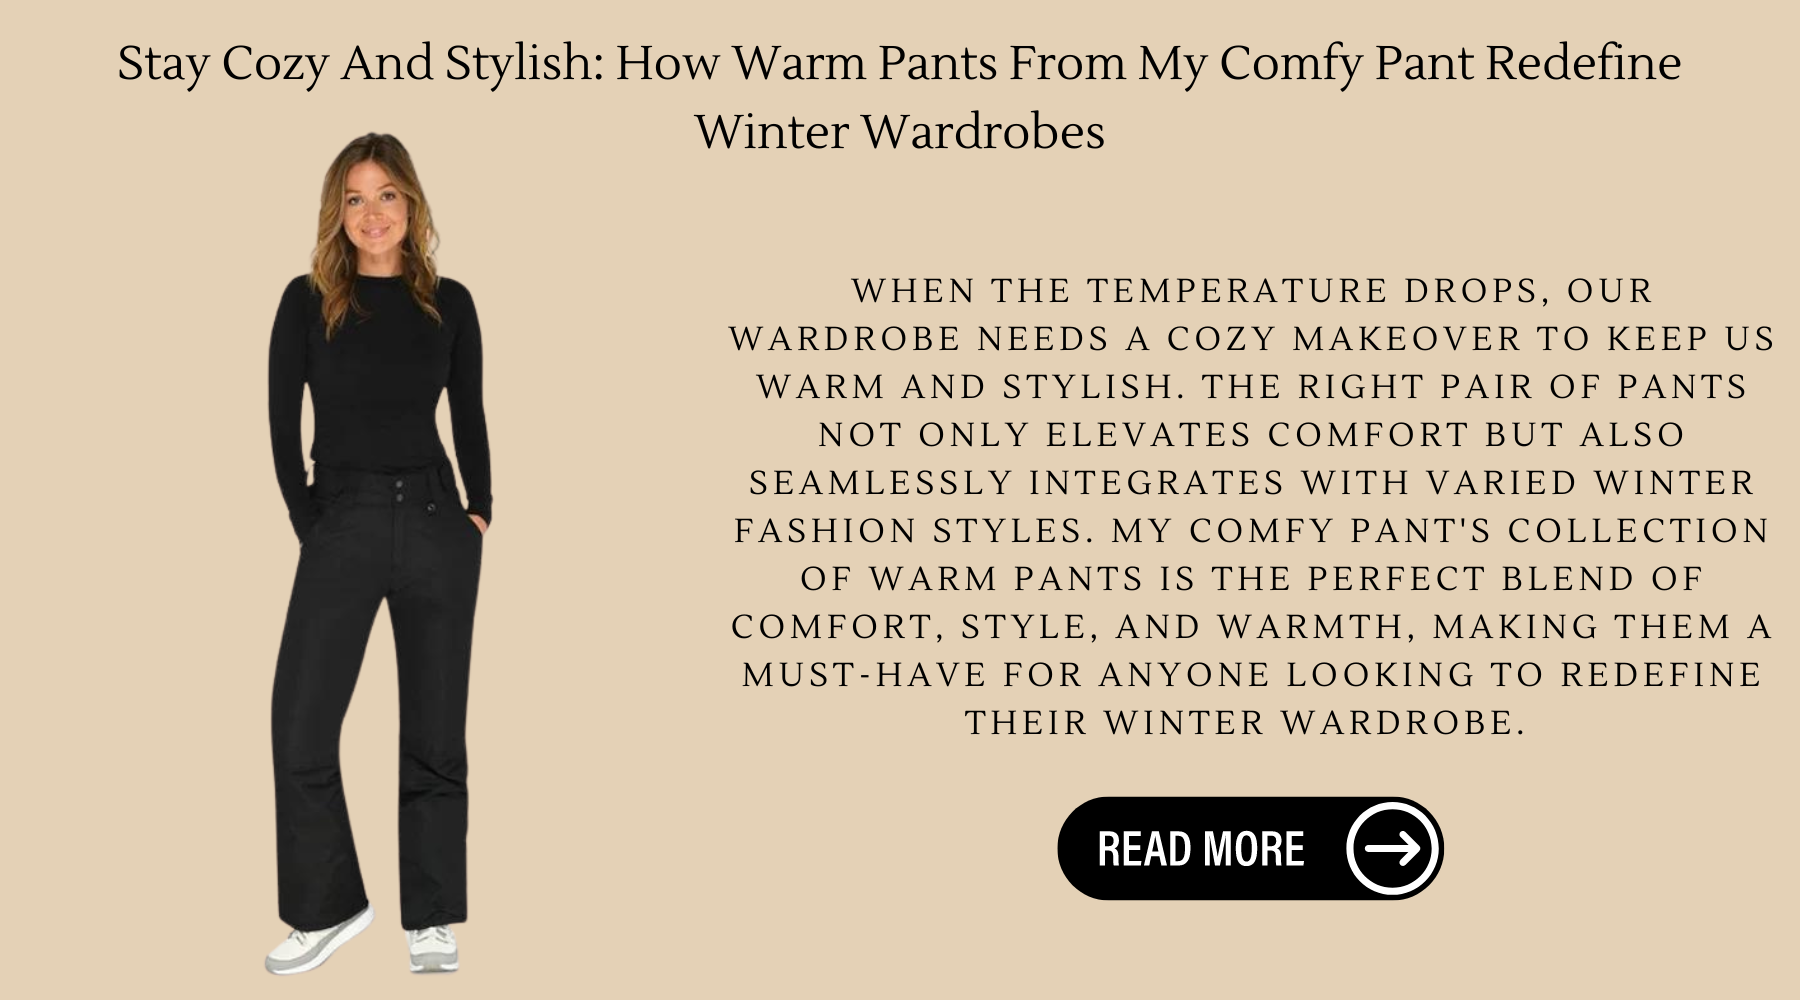 Stay Cozy And Stylish: How Warm Pants From My Comfy Pant Redefine Winter Wardrobes